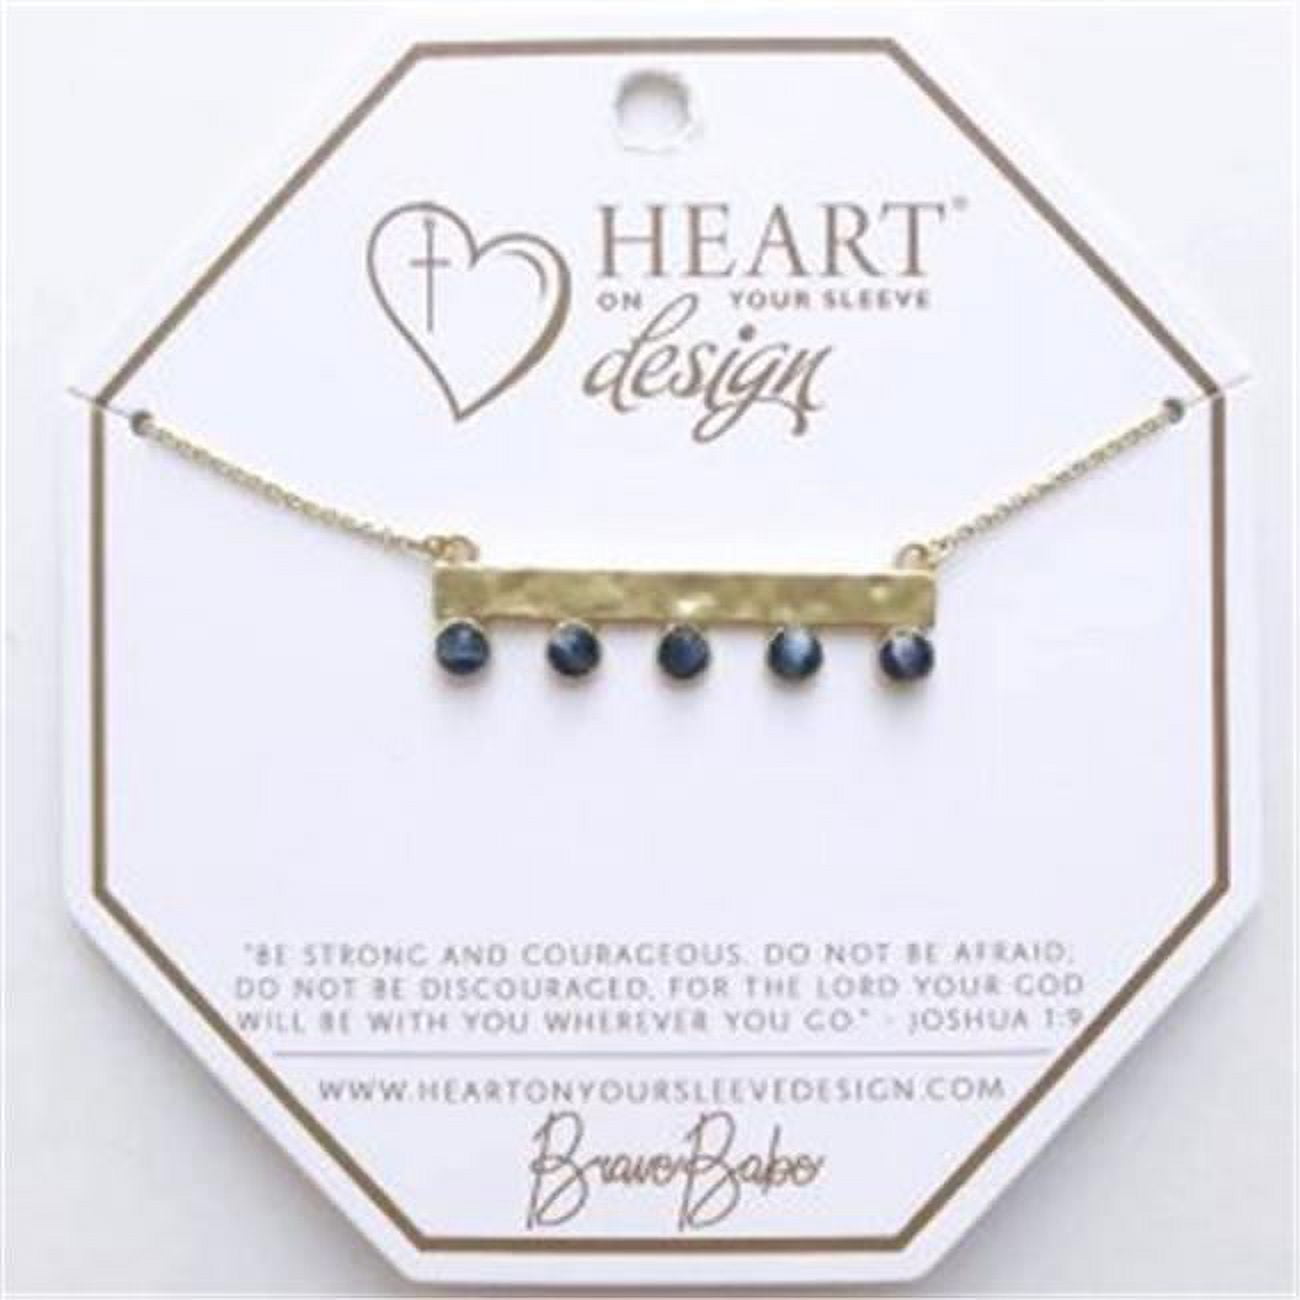 Heart On Your Sleeve Design 139333 14k Gold Bar Brave Babe Necklace With Dusk Stone Accents